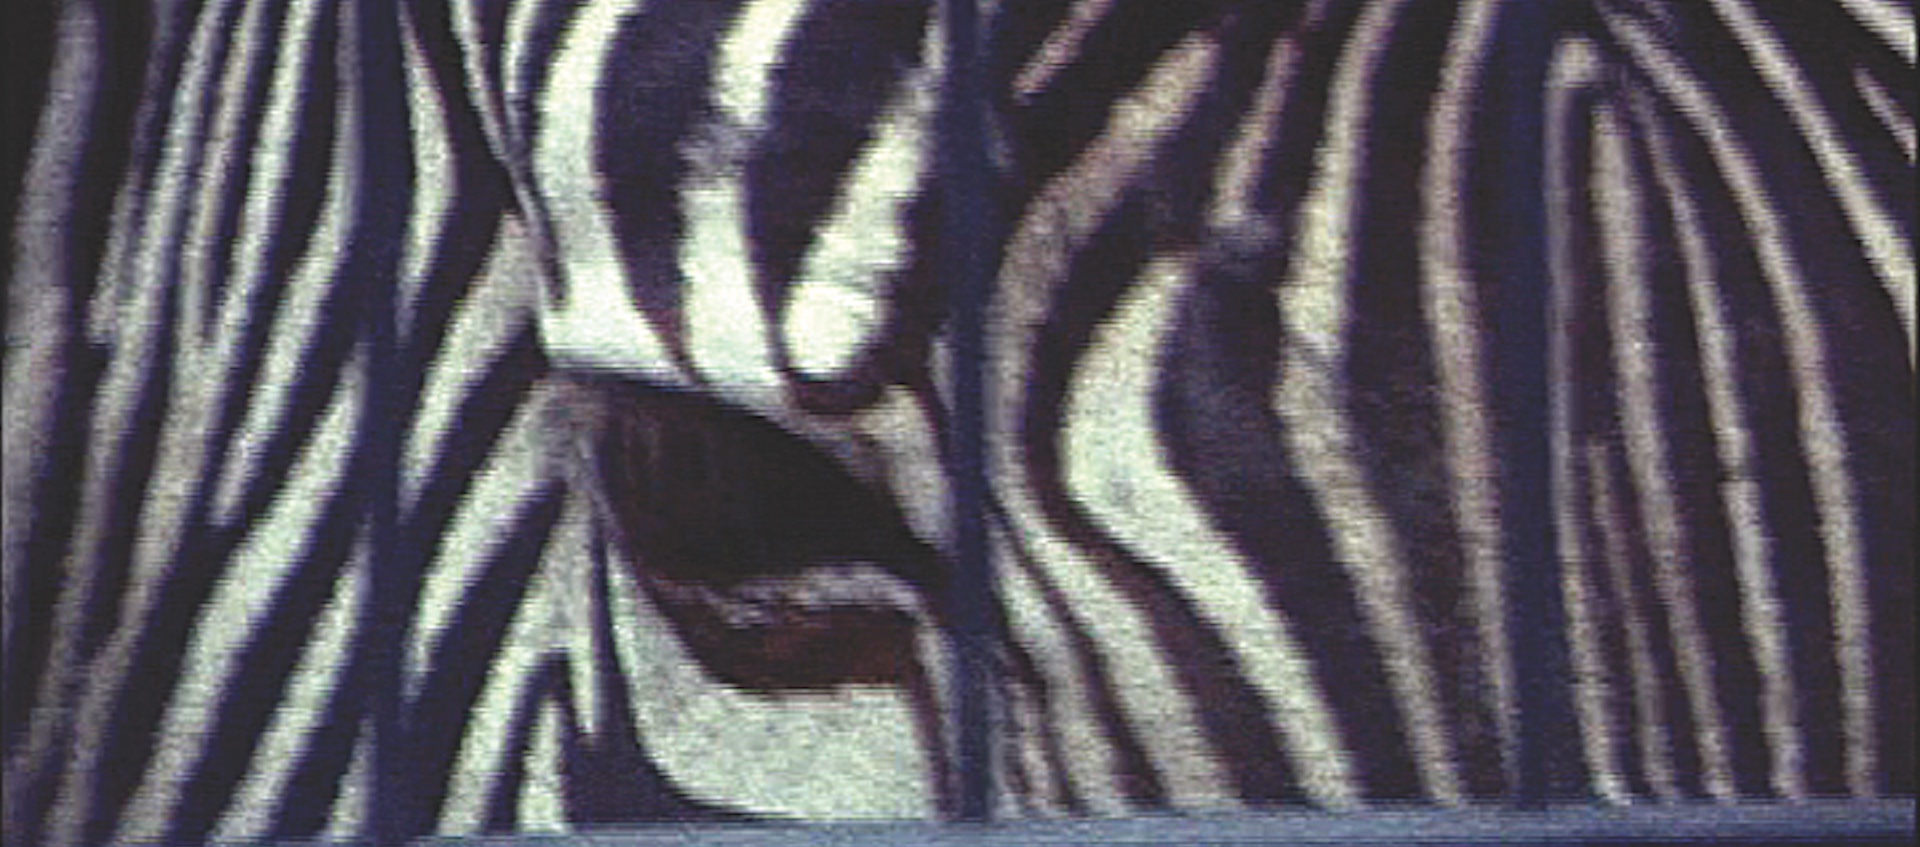 profile image of the face of a zebra in captivity from Shelly Silver's short film small lies, Big Truth